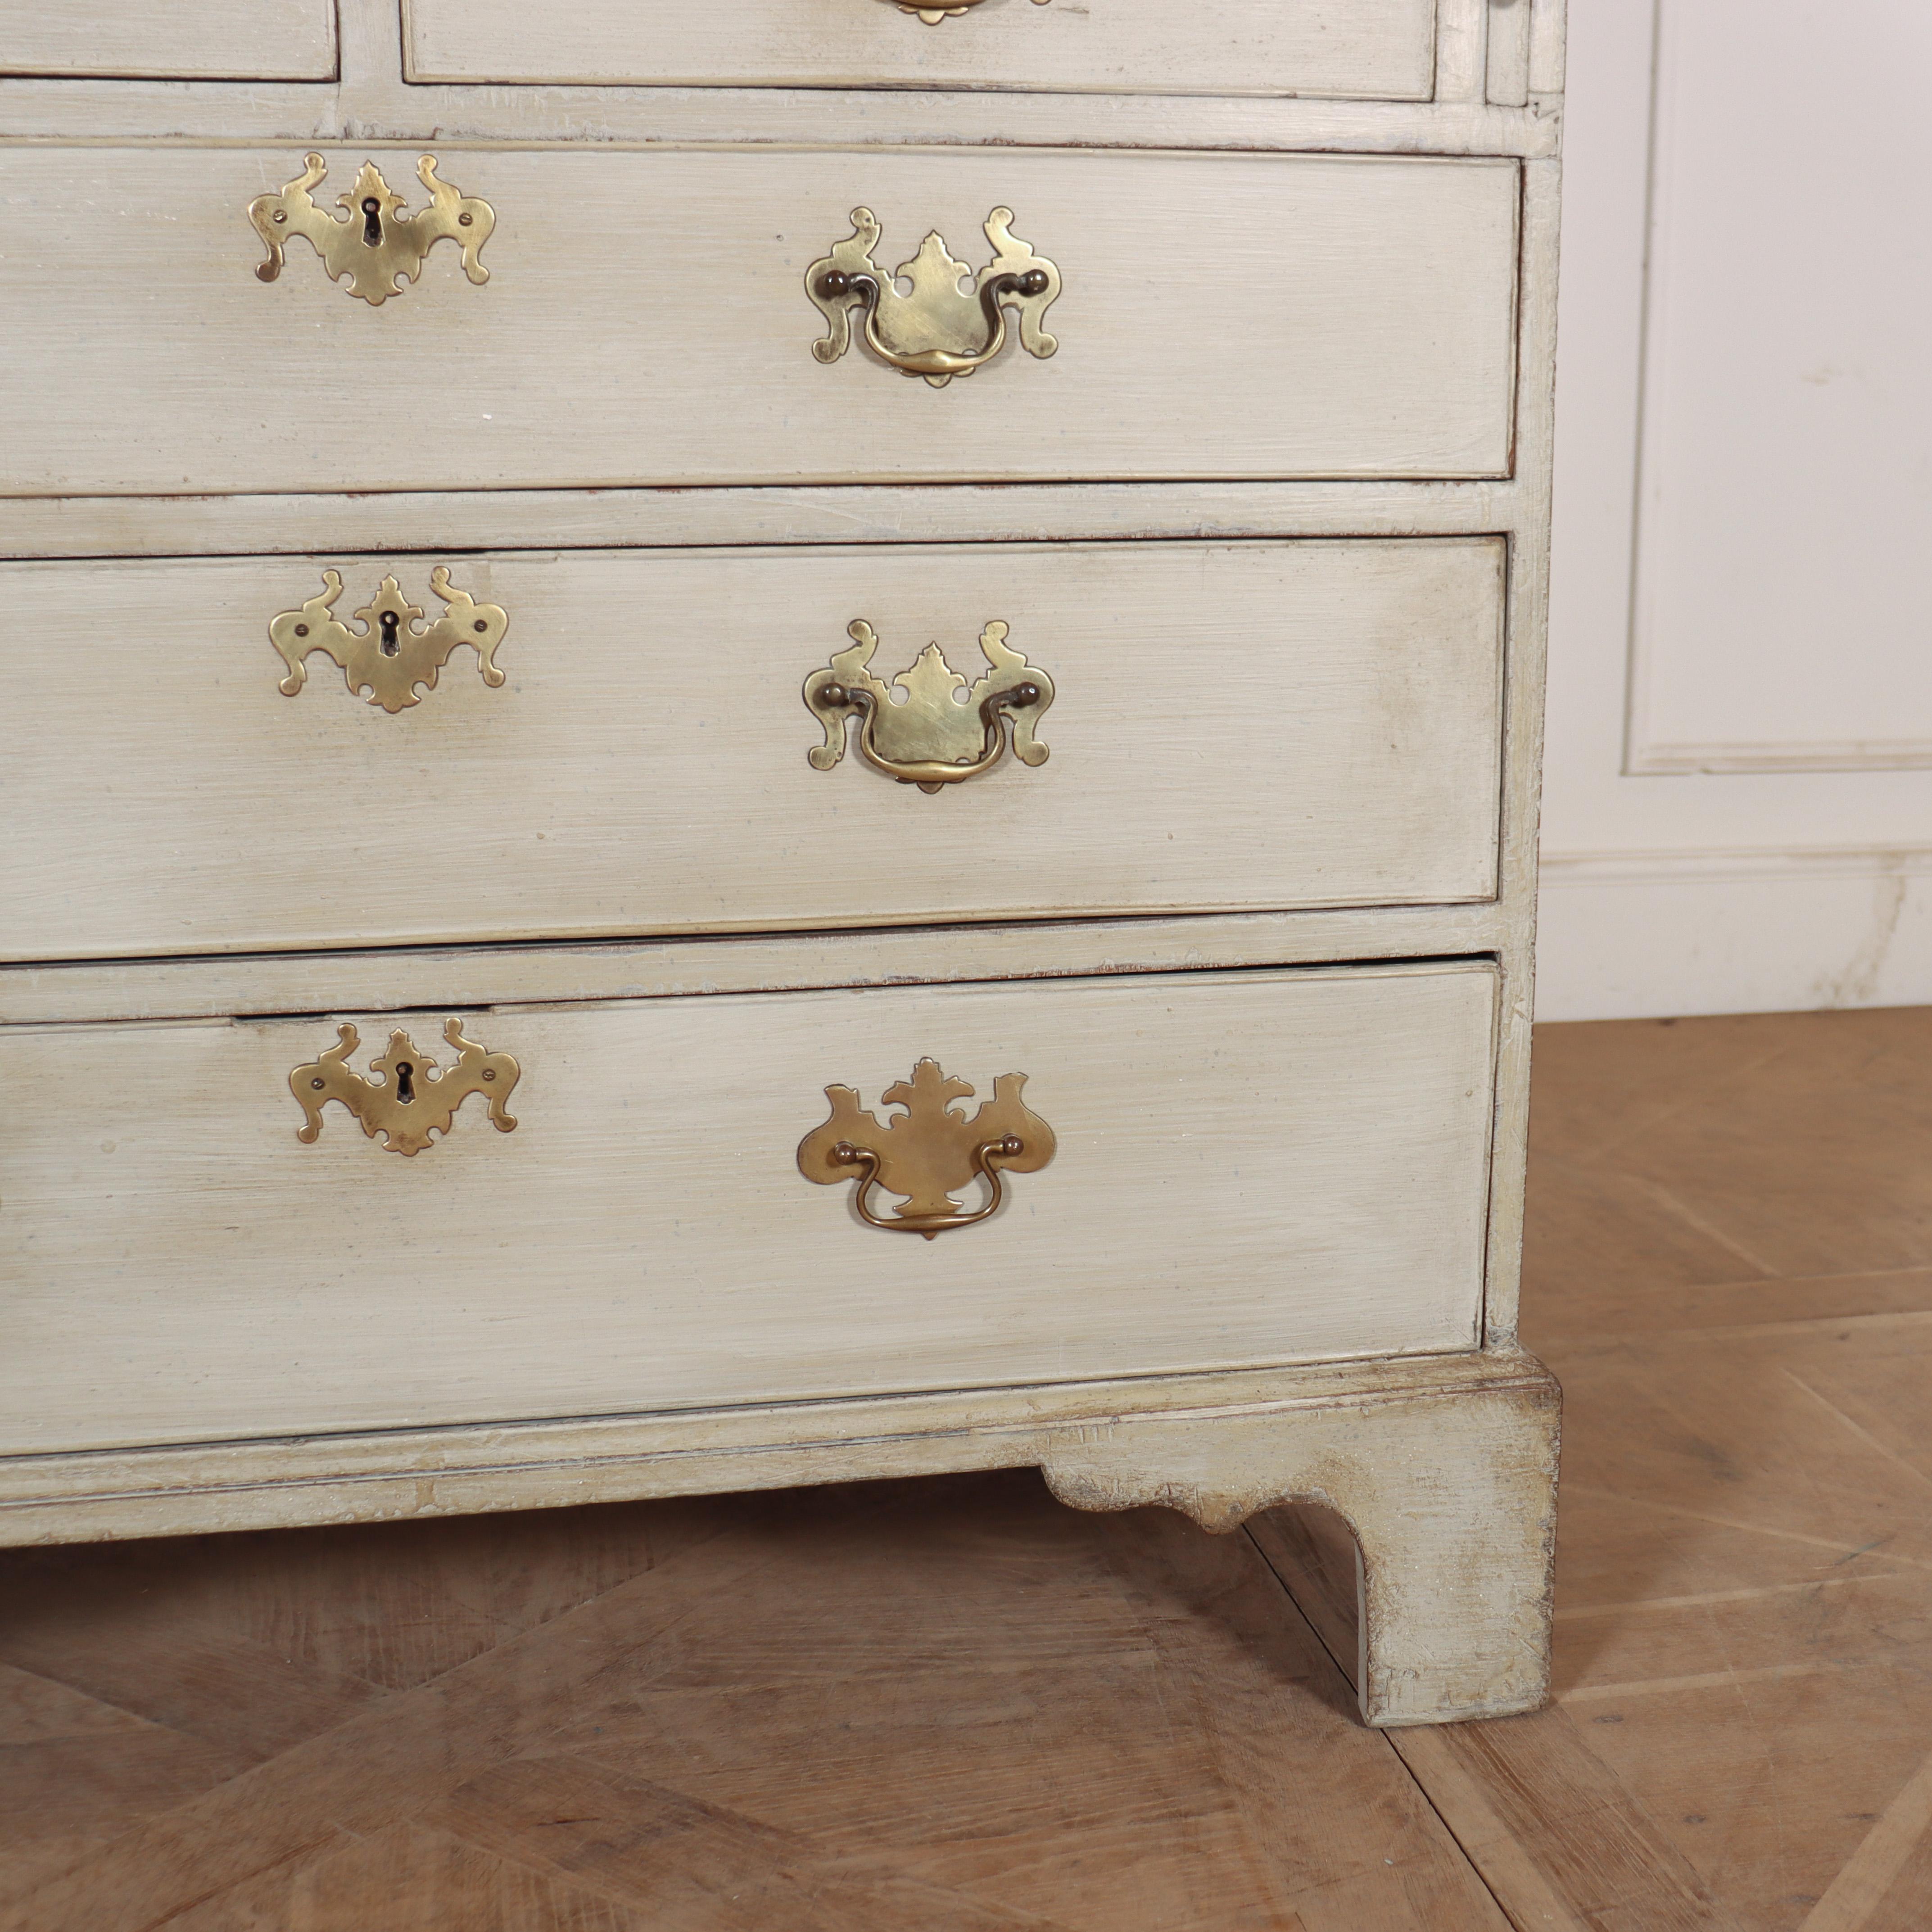 18th Century Painted Bureau In Good Condition For Sale In Leamington Spa, Warwickshire